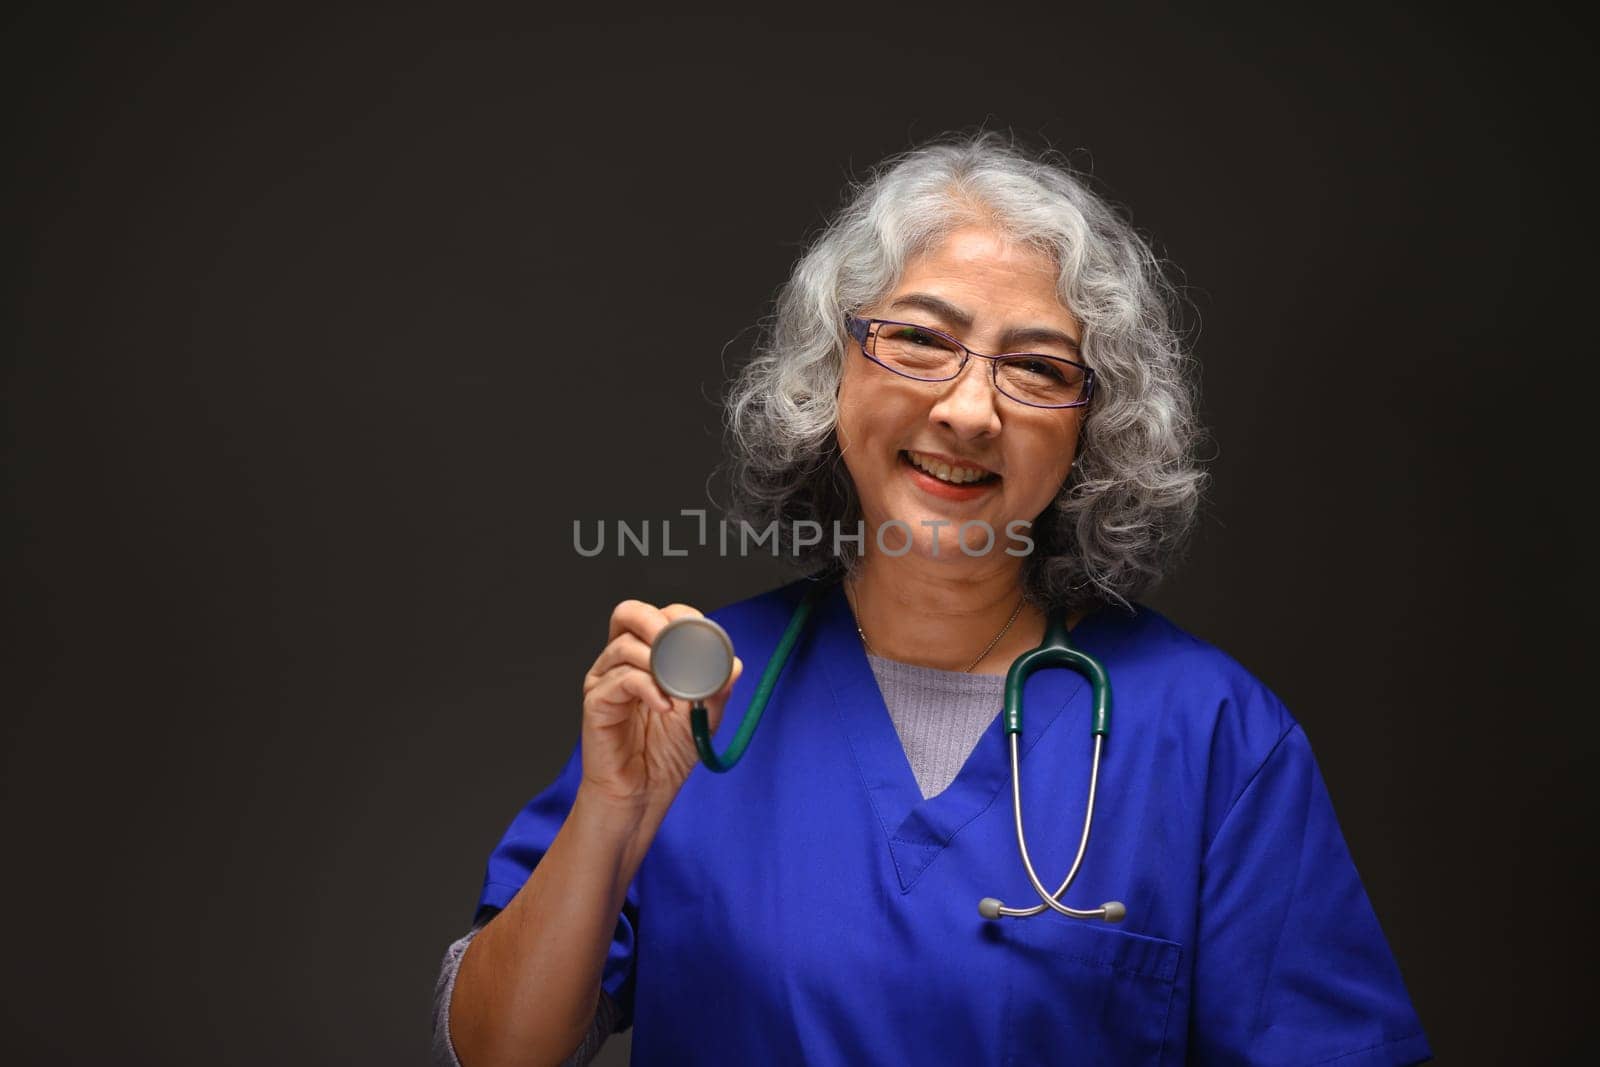 Portrait of friendly mature female doctor with stethoscope around her neck standing on black background.